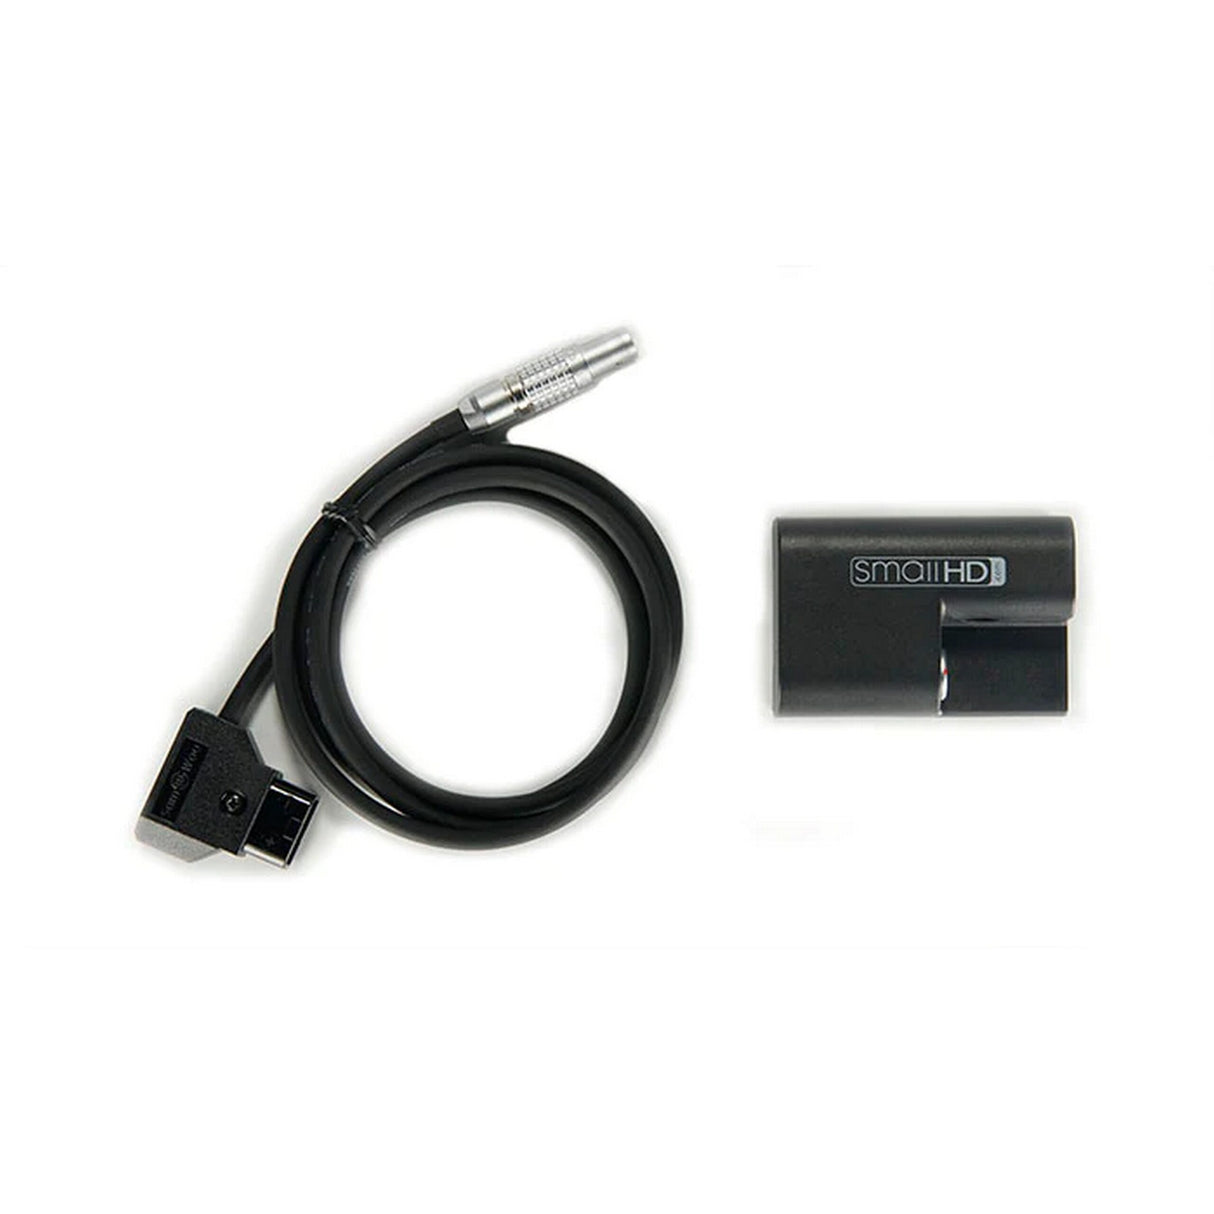 SmallHD 17-3041 DCA5 2-Pin Power Adapter to D-Tap Cable Kit